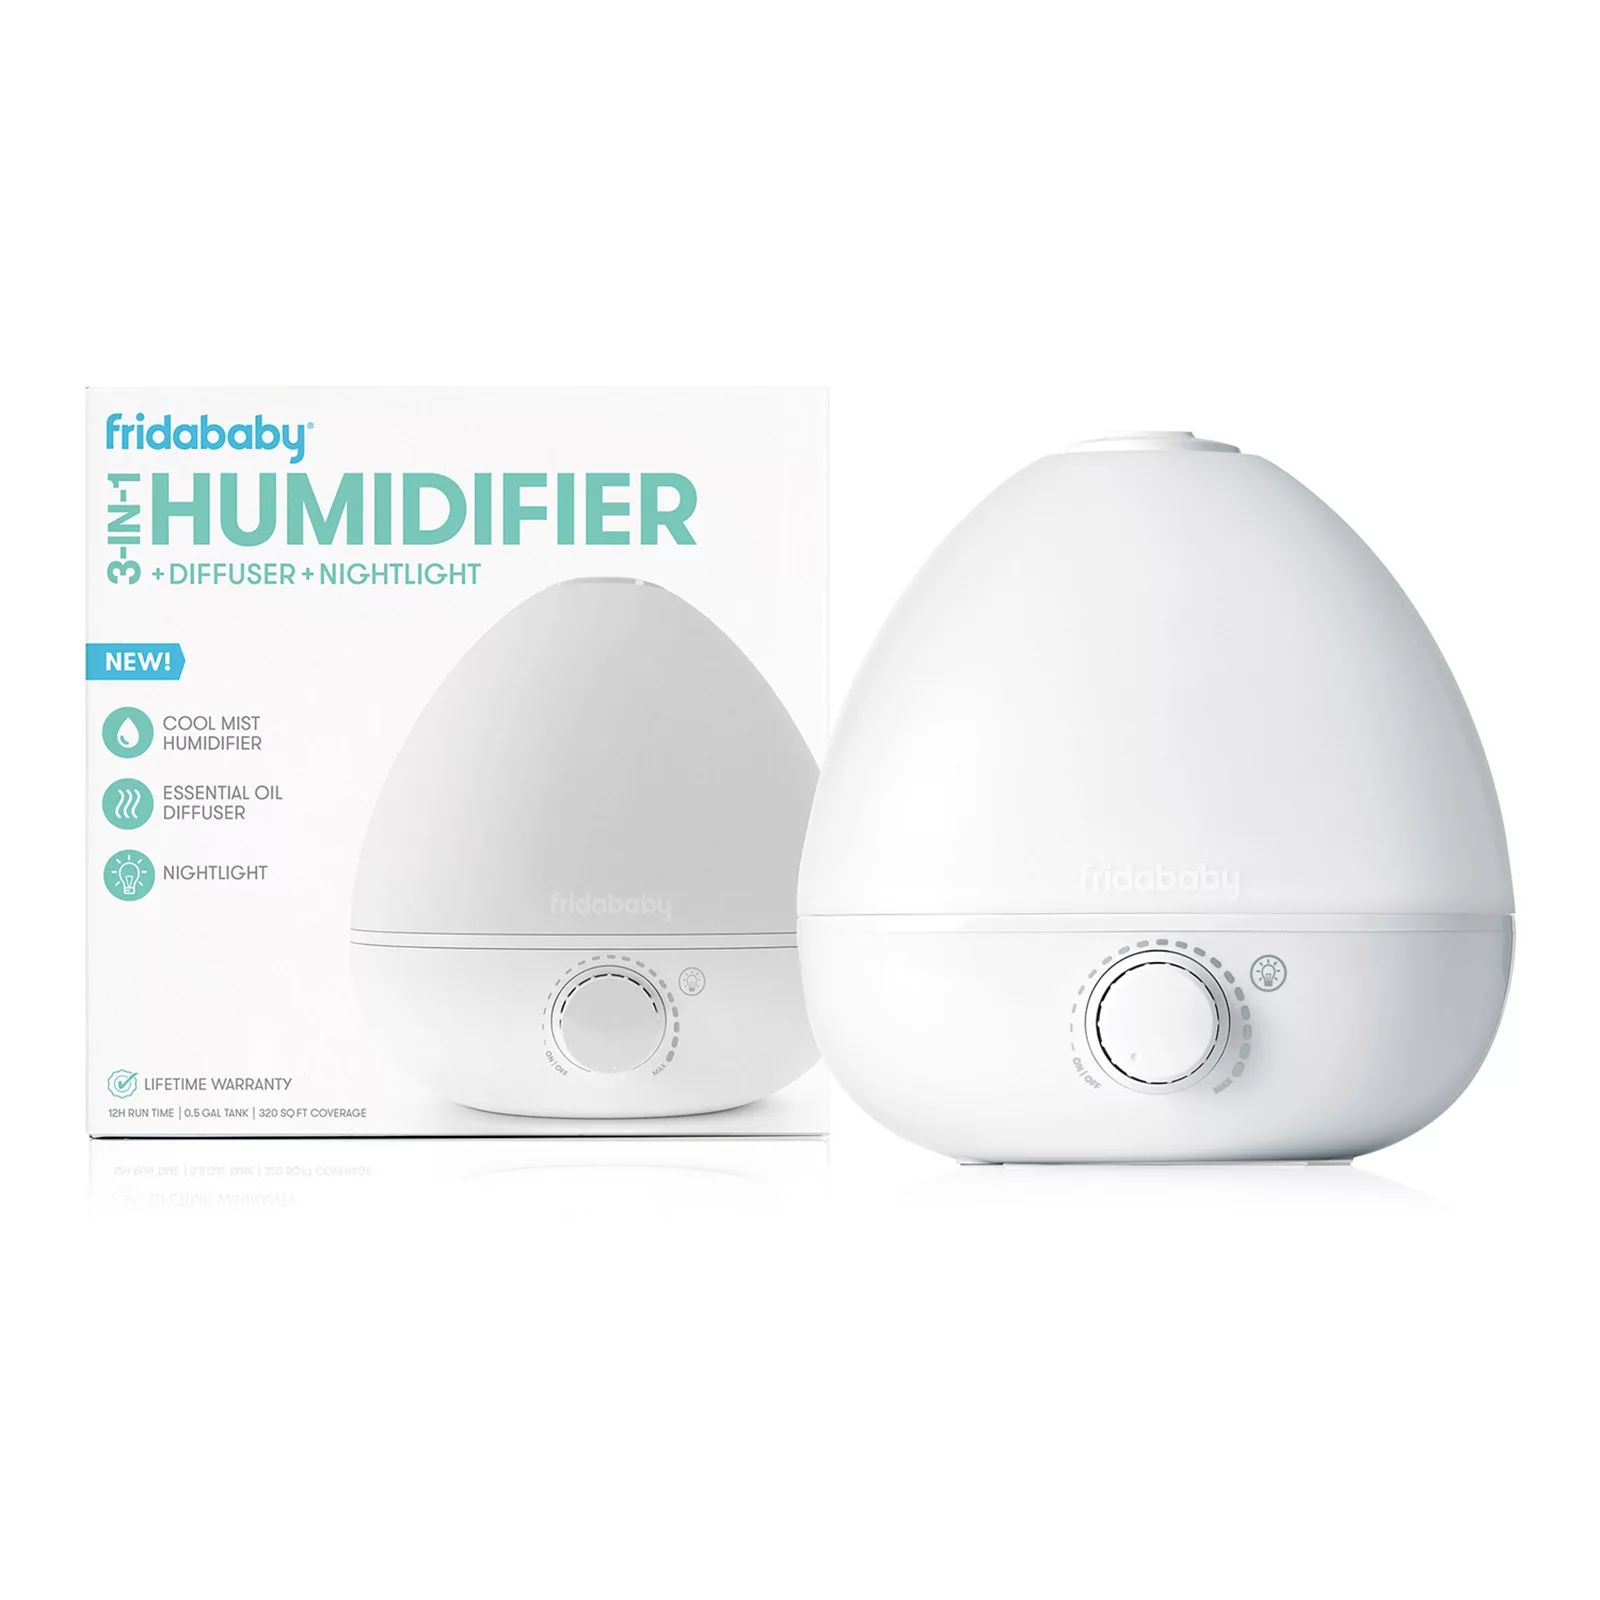 Fridababy 3-in-1 Humidifier with Diffuser and Nightlight, Multicolor | Kohl's